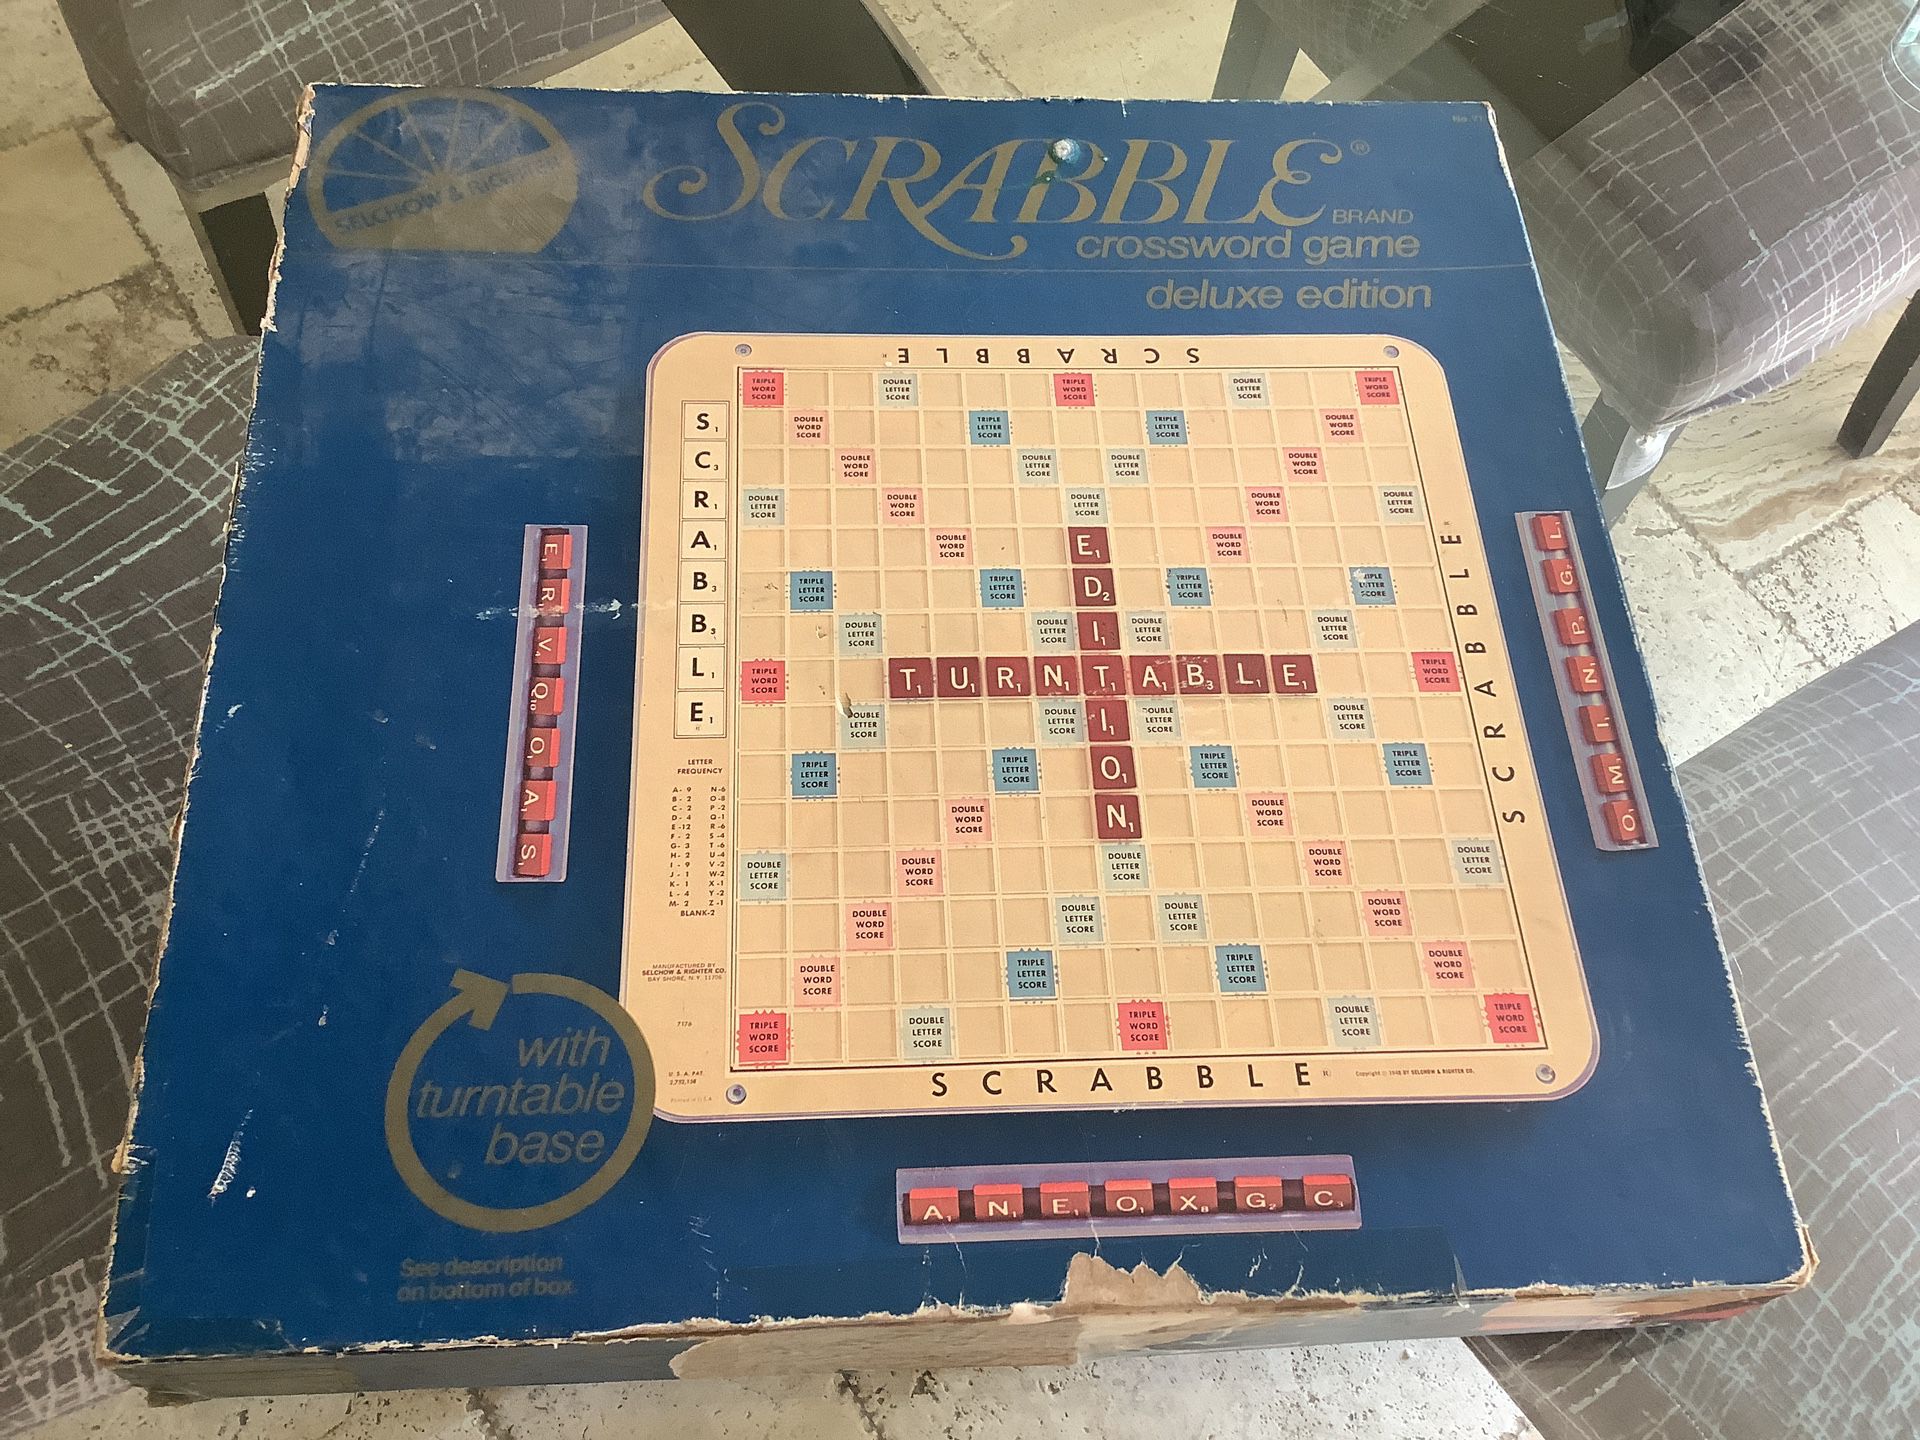 Vintage Scrabble Deluxe Edition Turntable Board Game 1977 Mint Condition 100 Tiles SYLMAR 